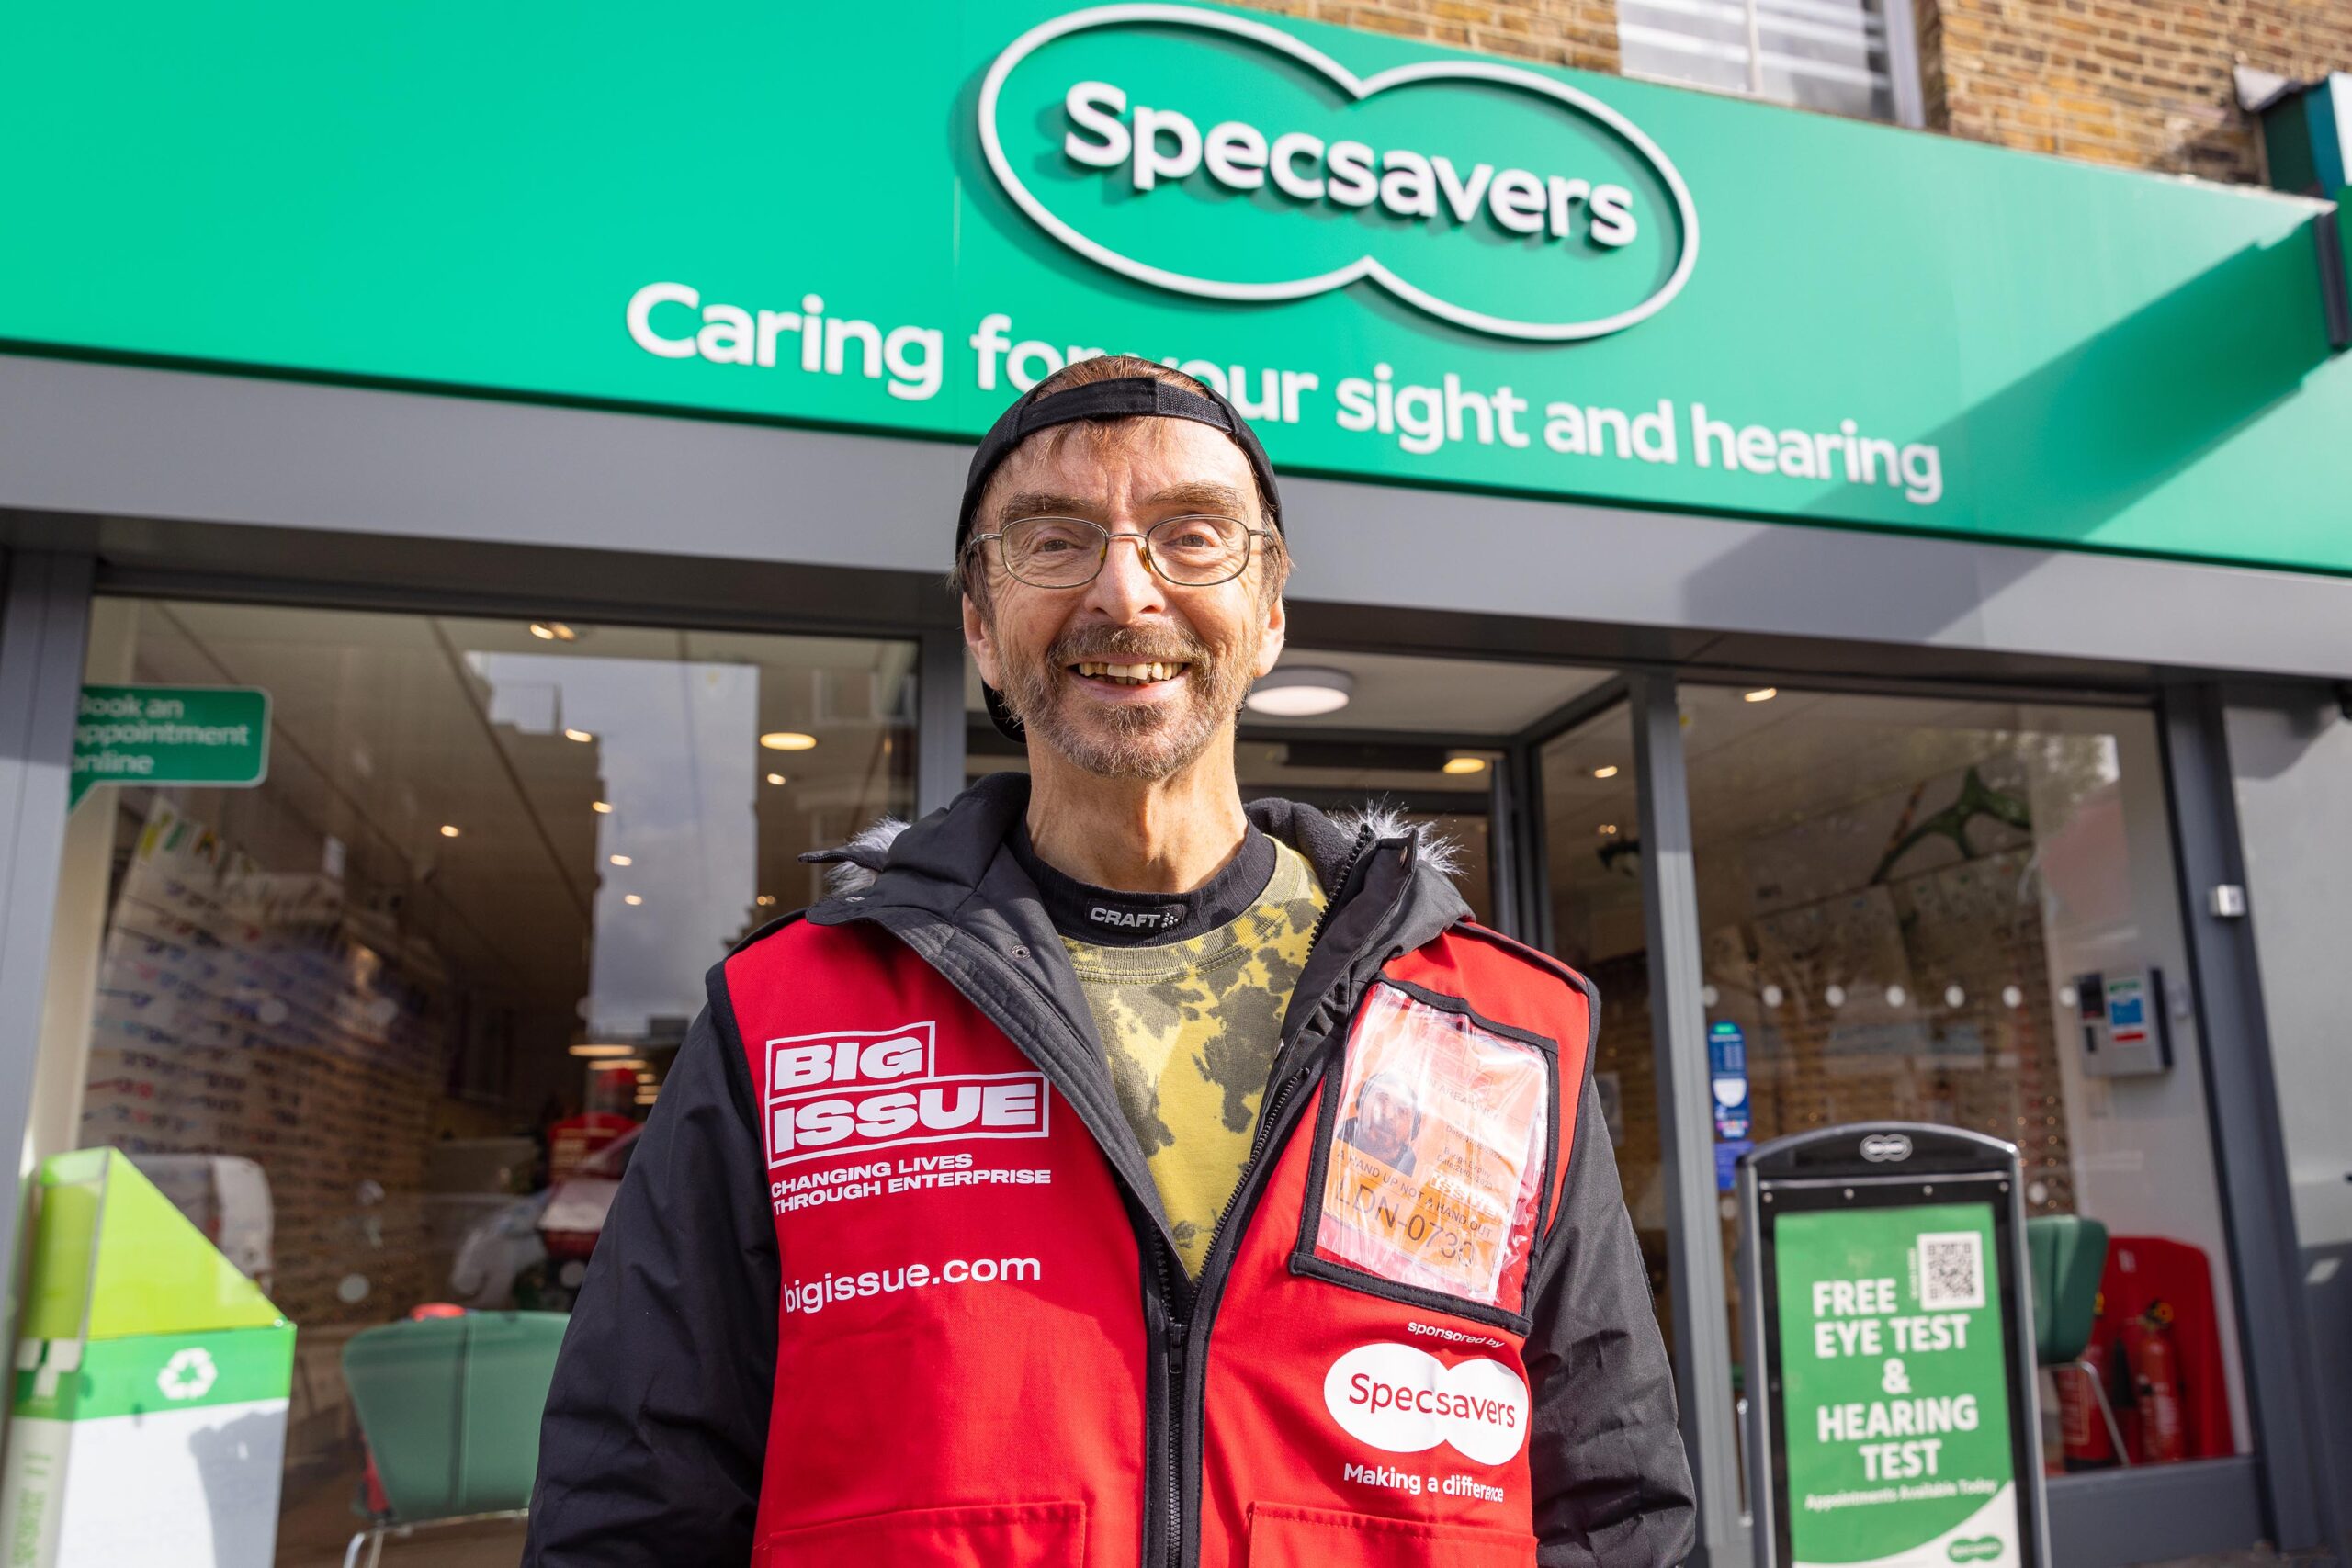 Specsavers to offer Big Issue vendors eye tests, spectacles and hearing tests